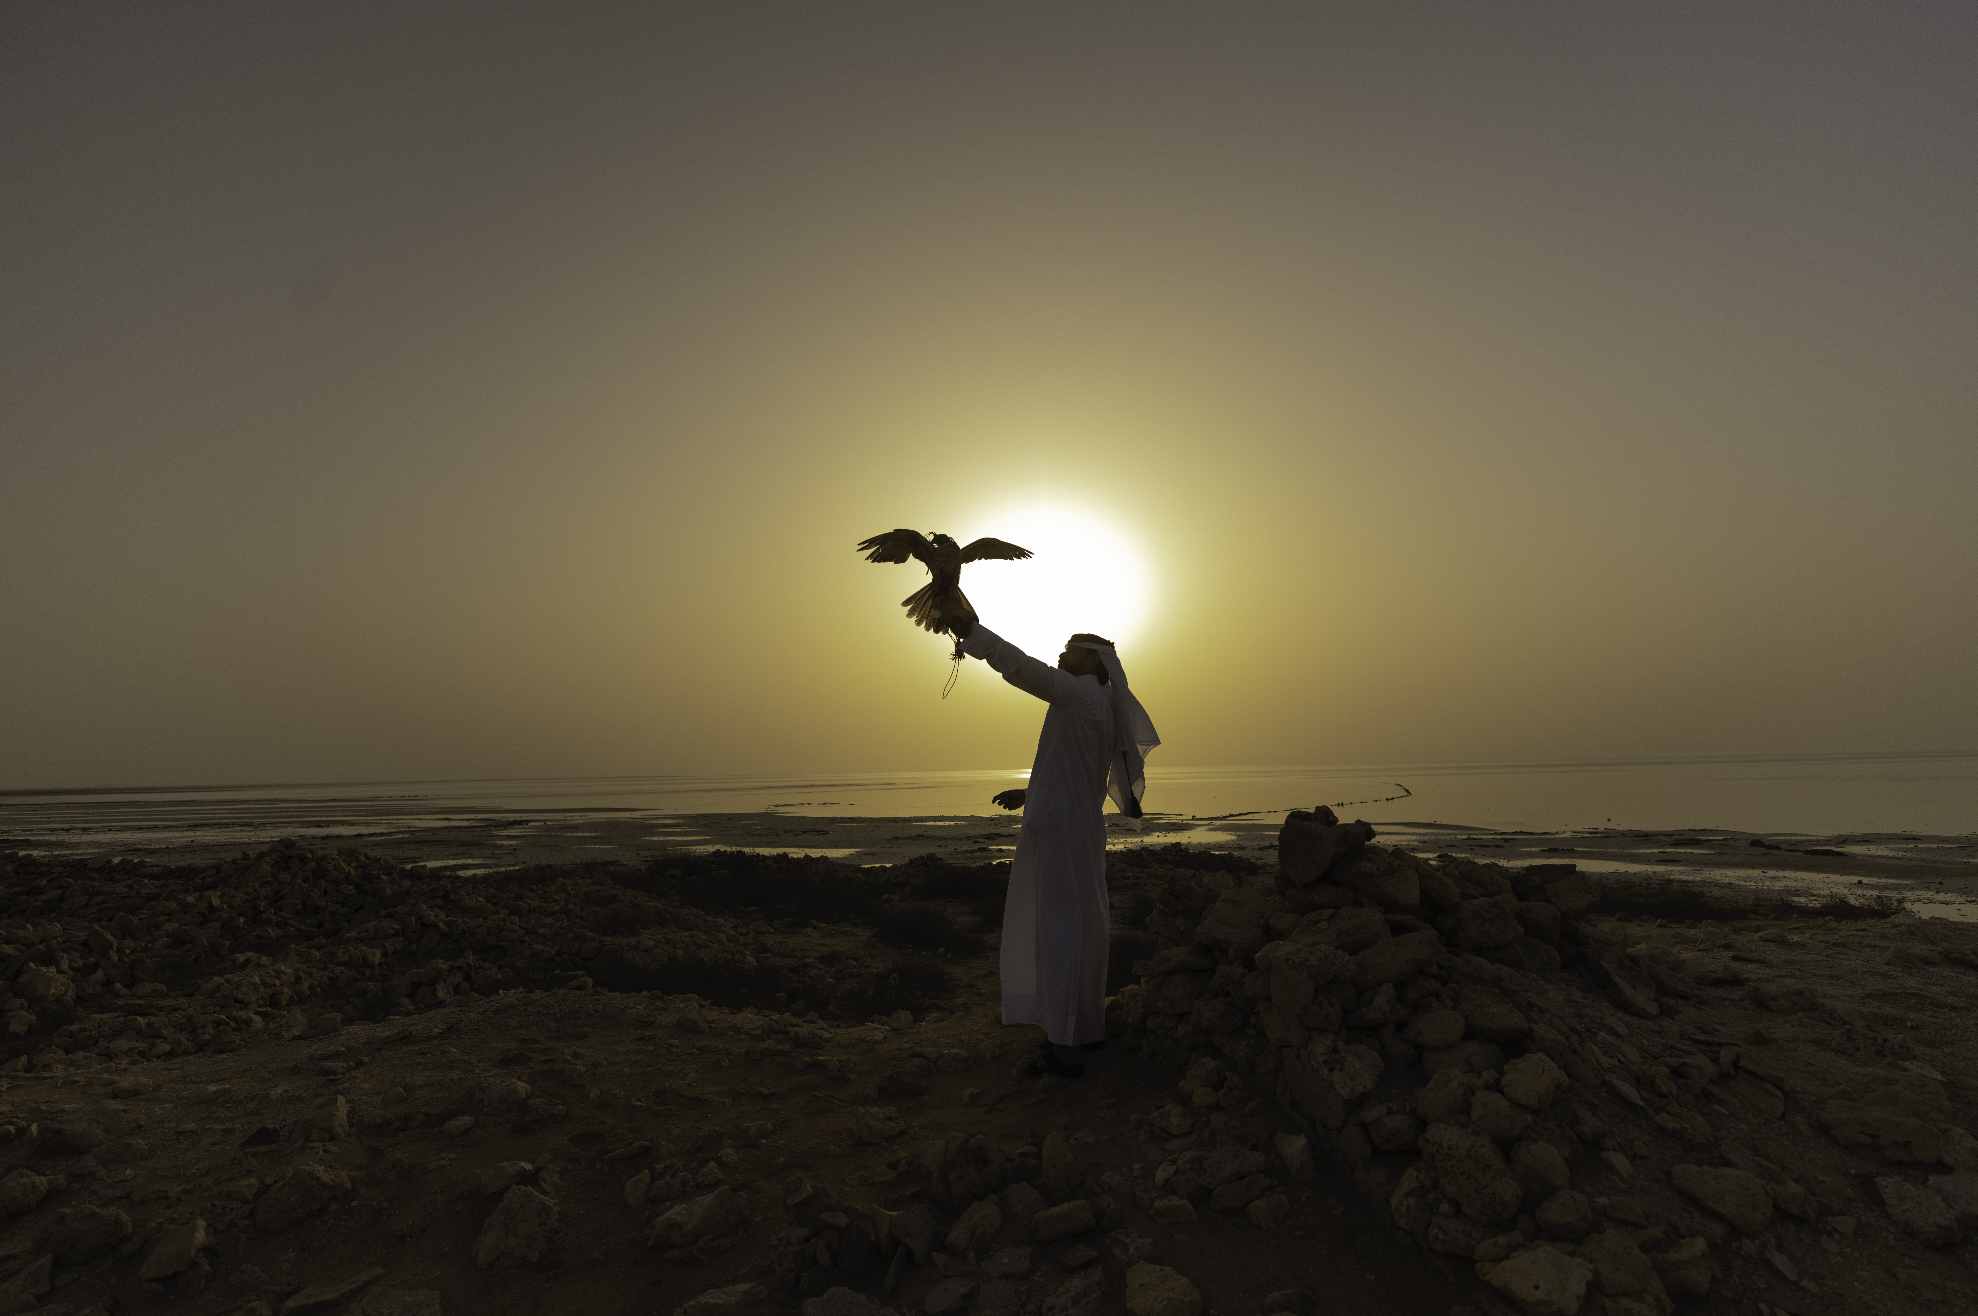 A person stands on a rocky beach. Their left arm is raised in front of them, and a falcon perches – with its wings spread – on their hand. The sun is setting directly behind the person and their falcon. A calm sea is visible in the background.